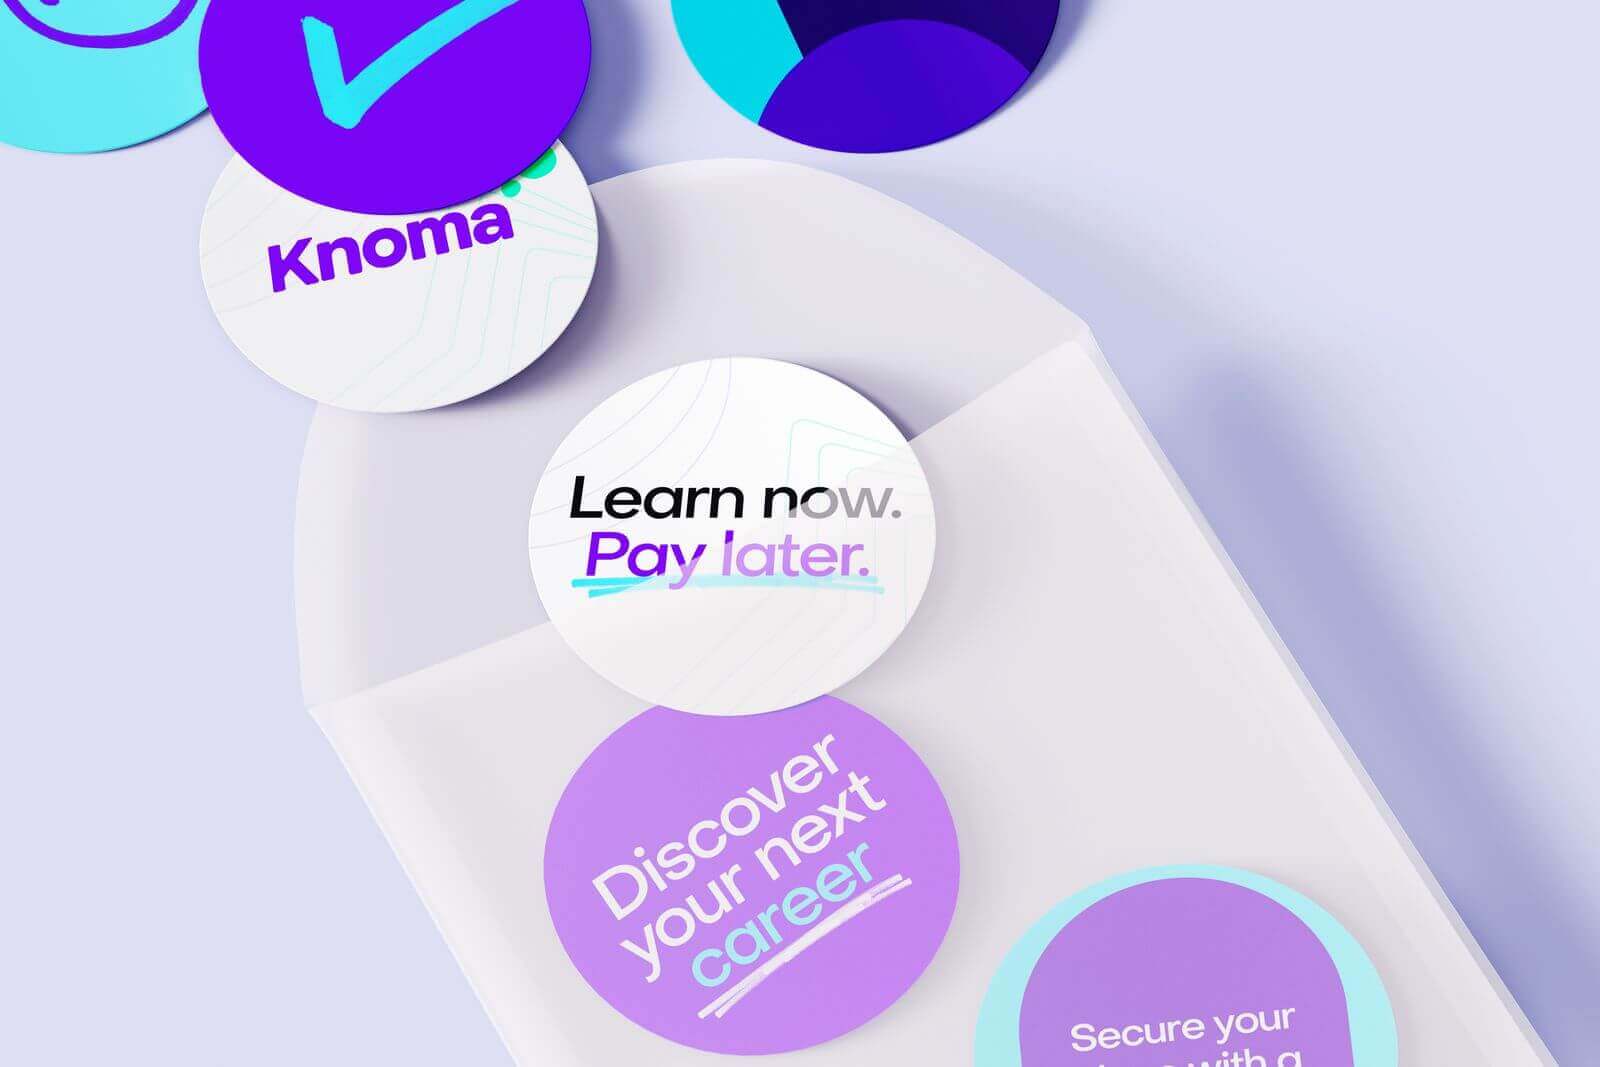 An envelop with stickers falling out, showcasing the Knoma brand.